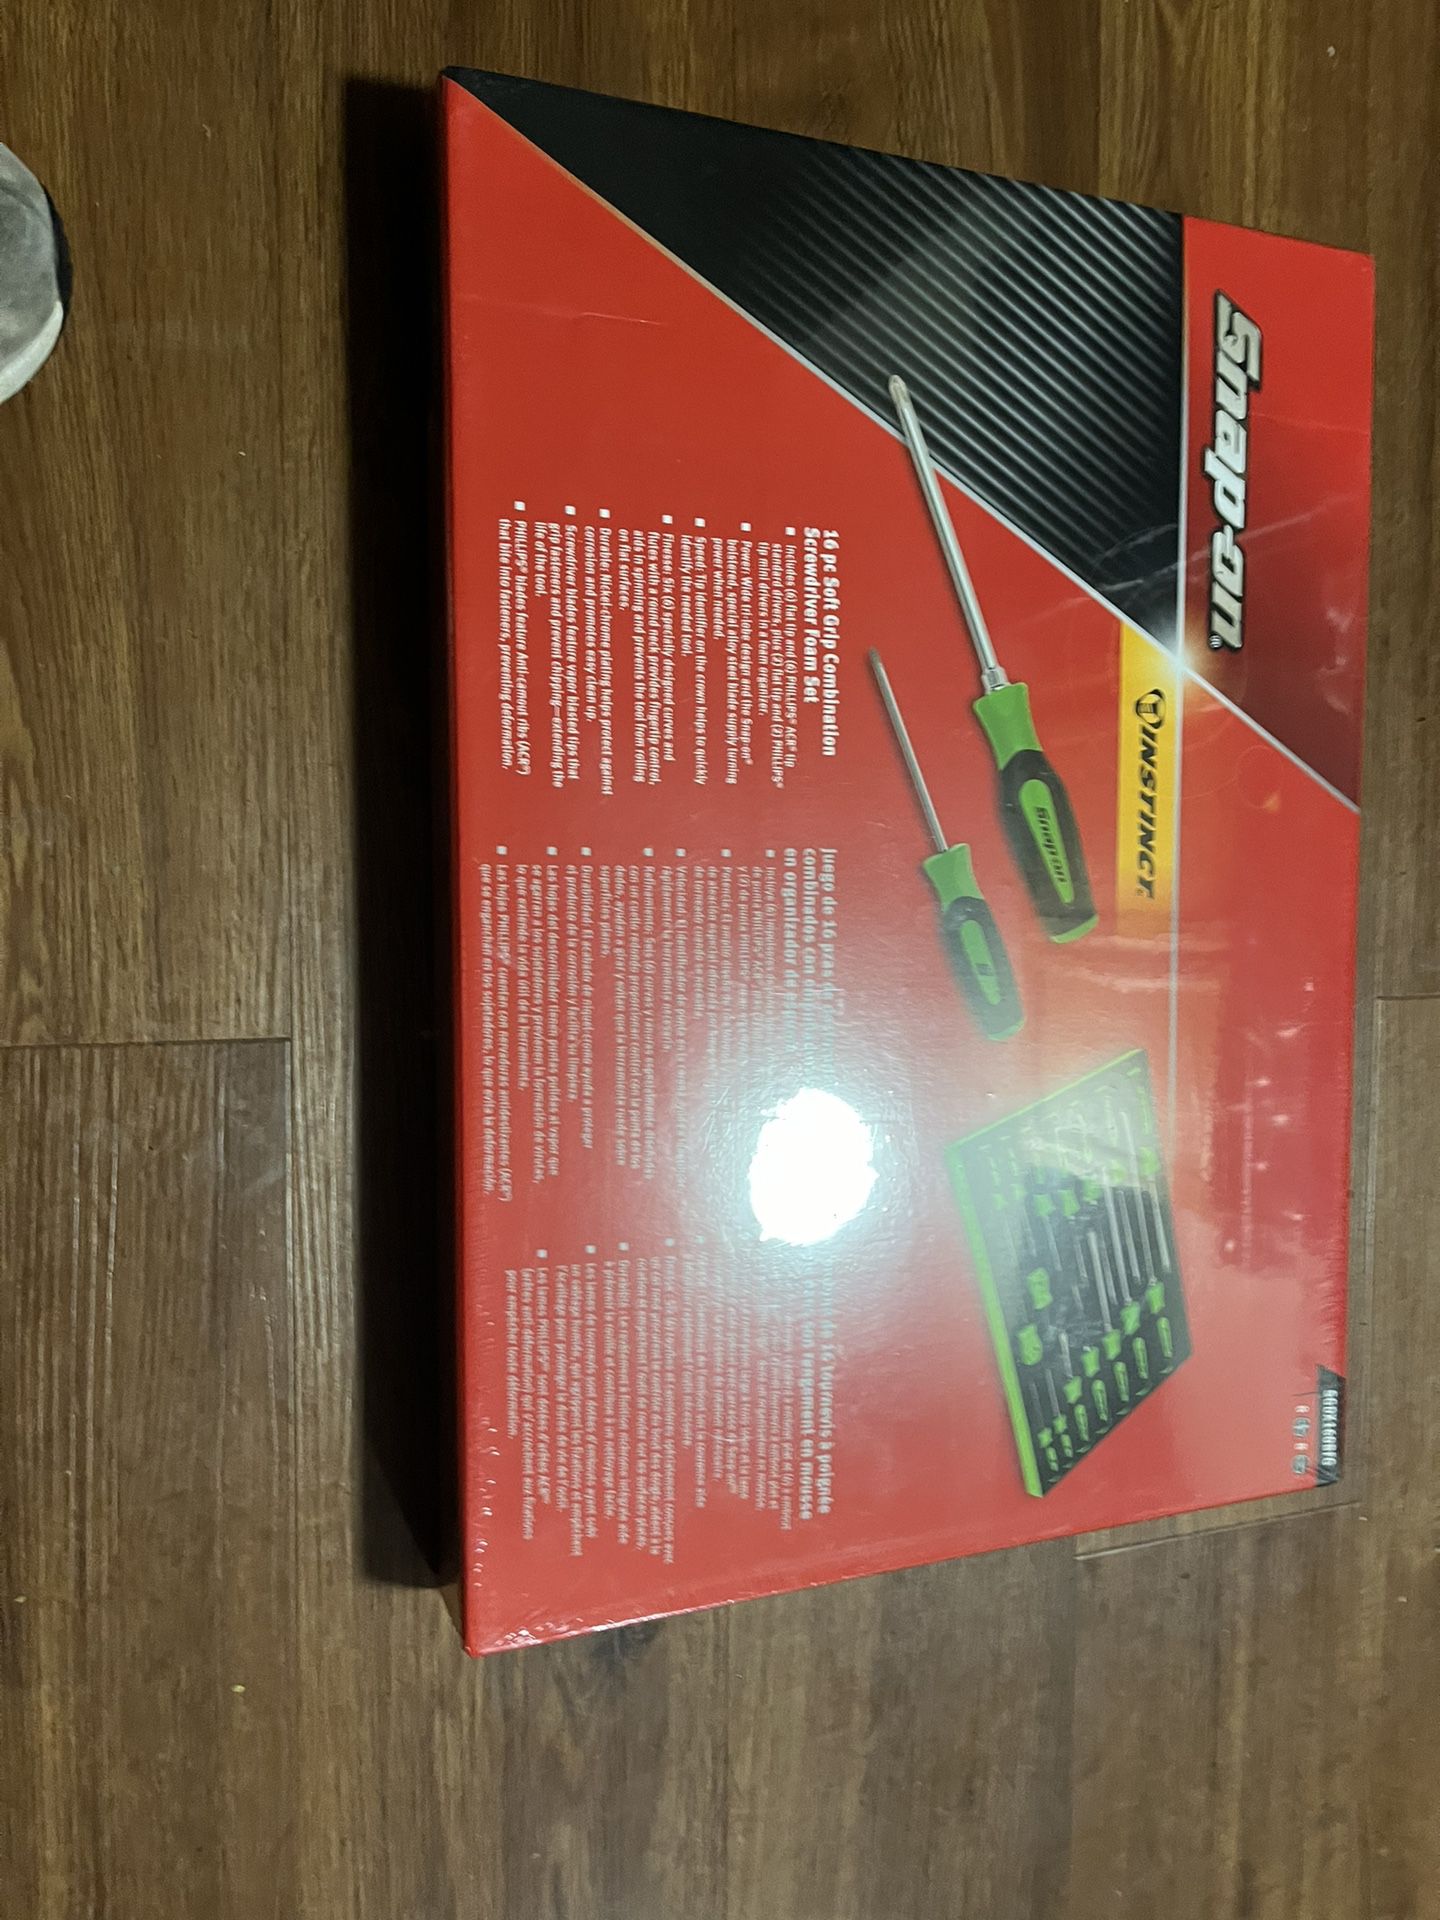 Brand new snap on 16 piece screwdriver set in foam never opened